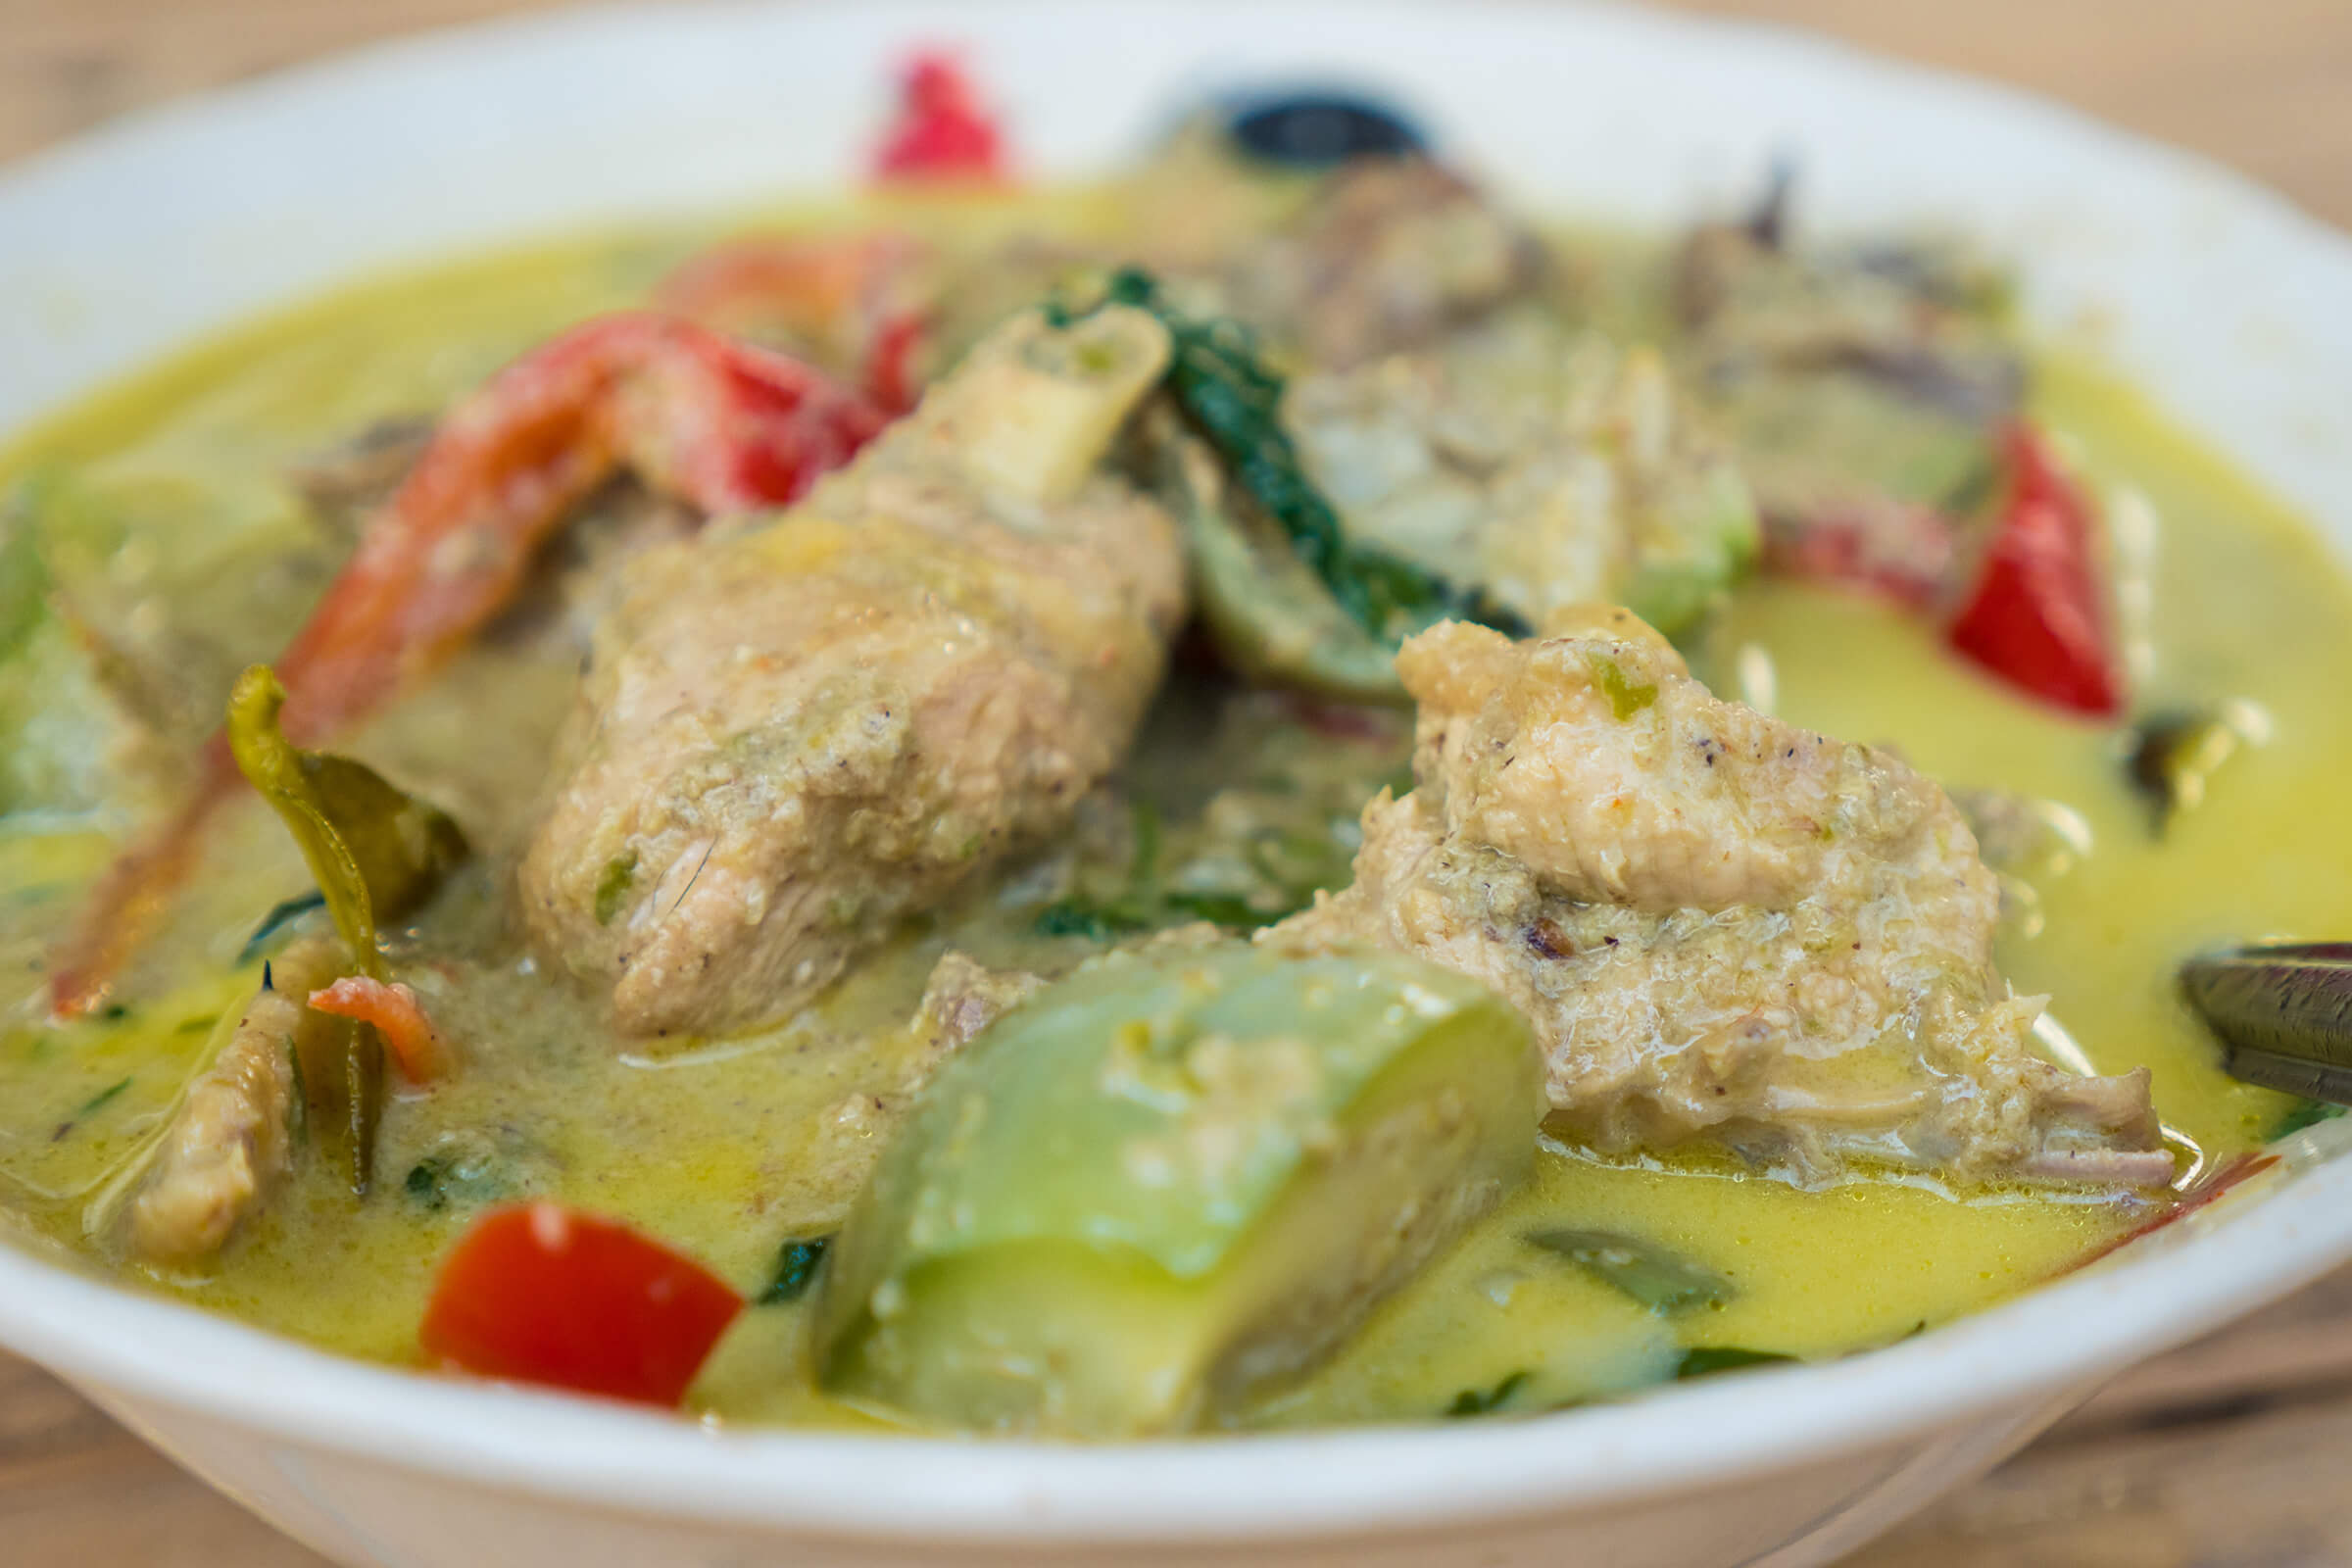 Authentic Thai Green Curry Recipe (แกงเขียวหวาน) by My Mother-In-Law